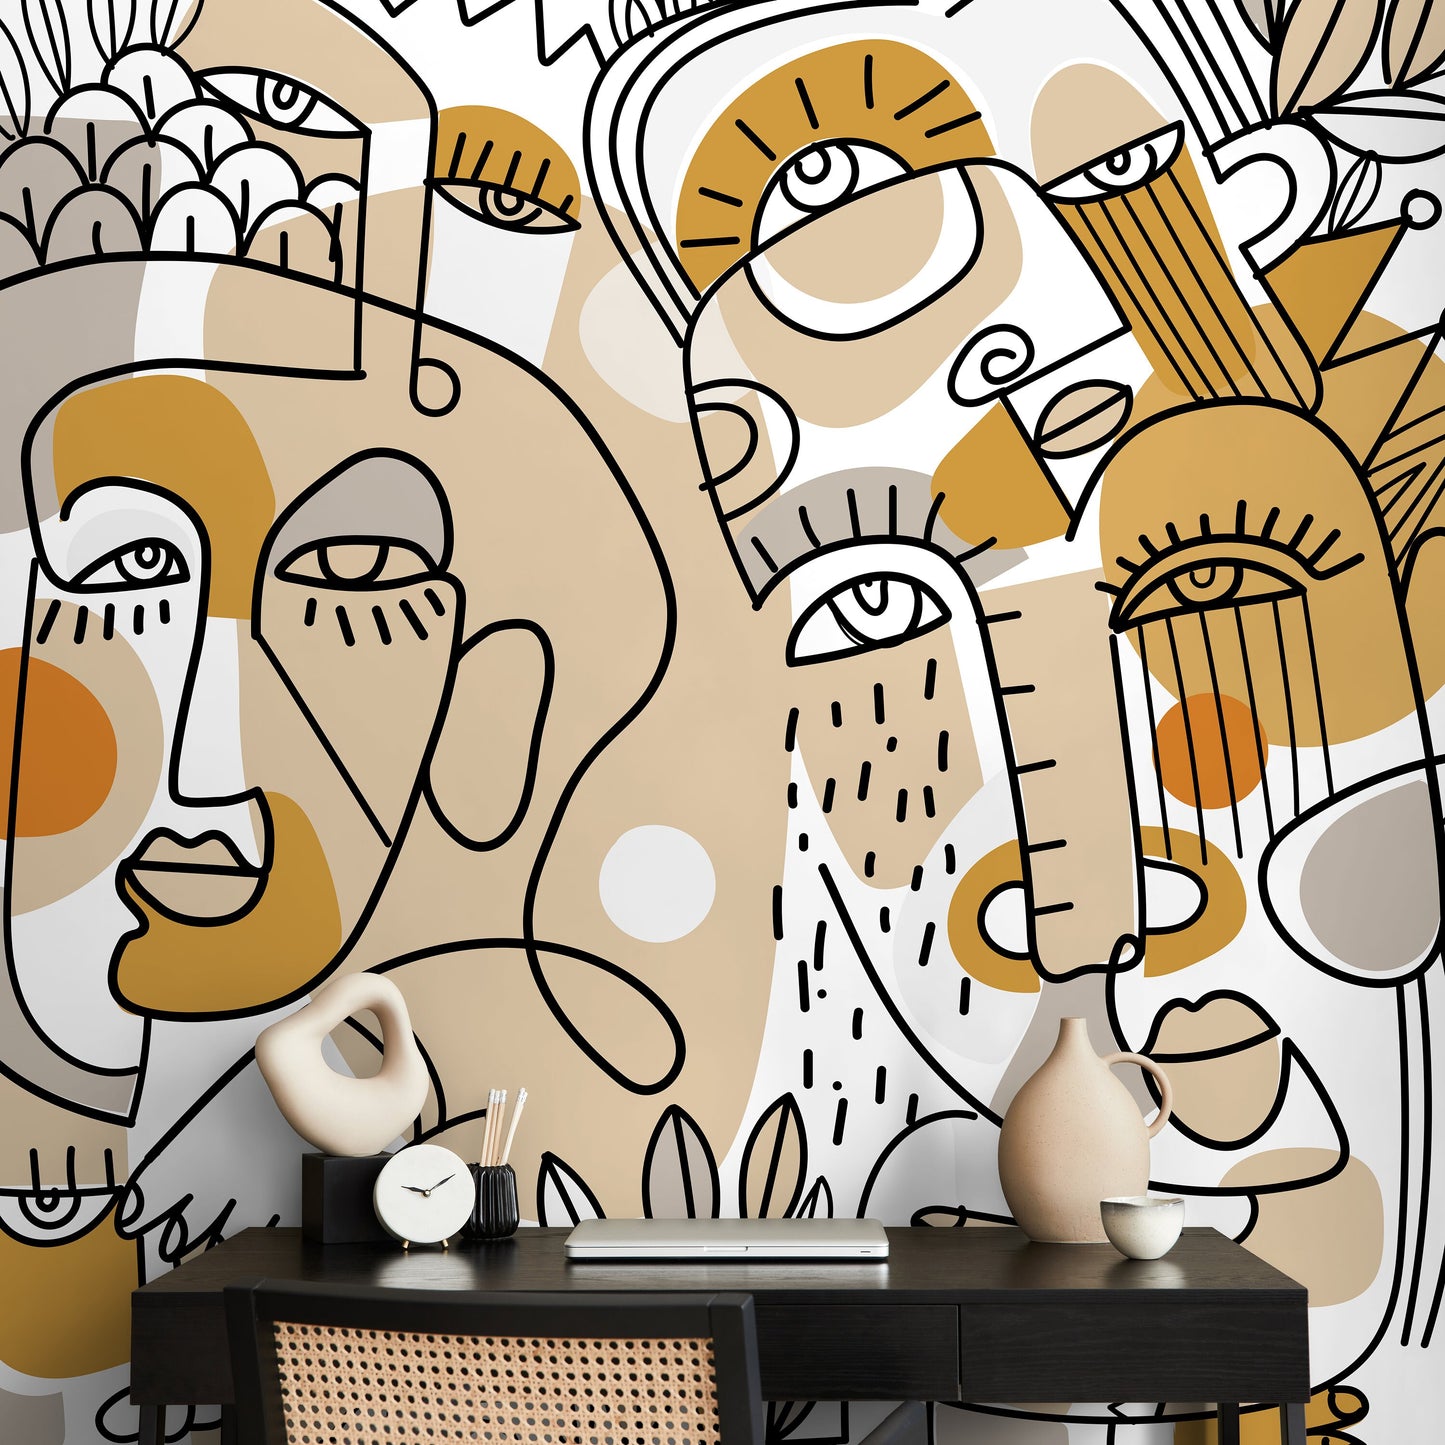 Beige Line Art Faces Wallpaper Abstract Mural Peel and Stick Wallpaper Home Decor - D554